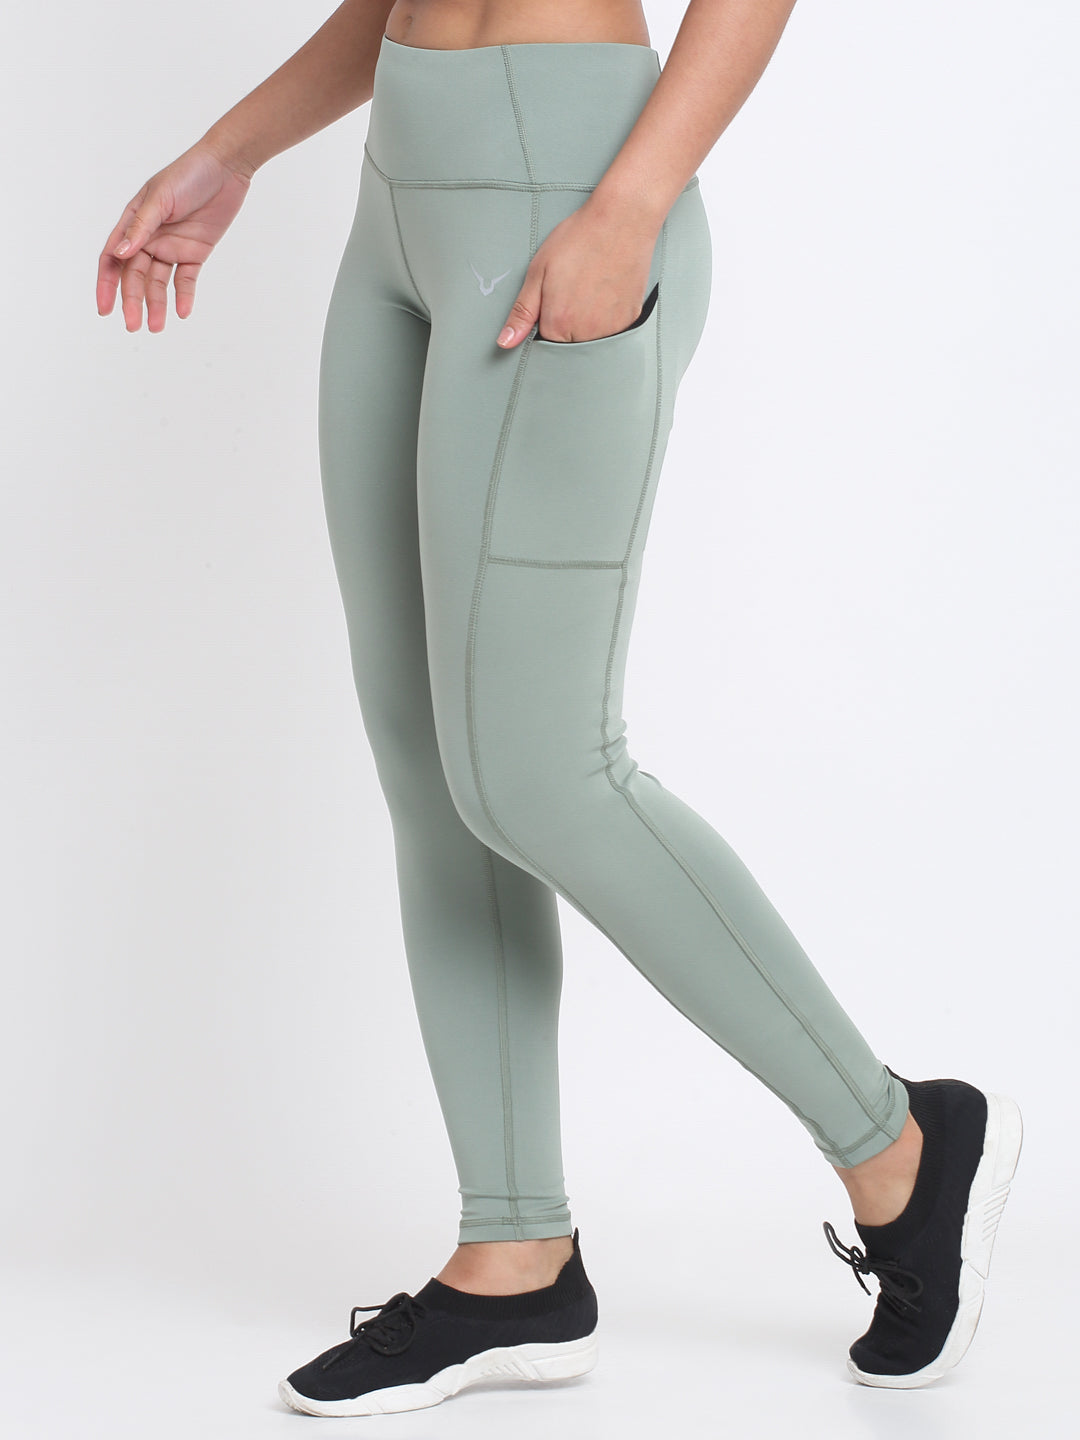 Invincible Women's Training Legging With Side Pocket